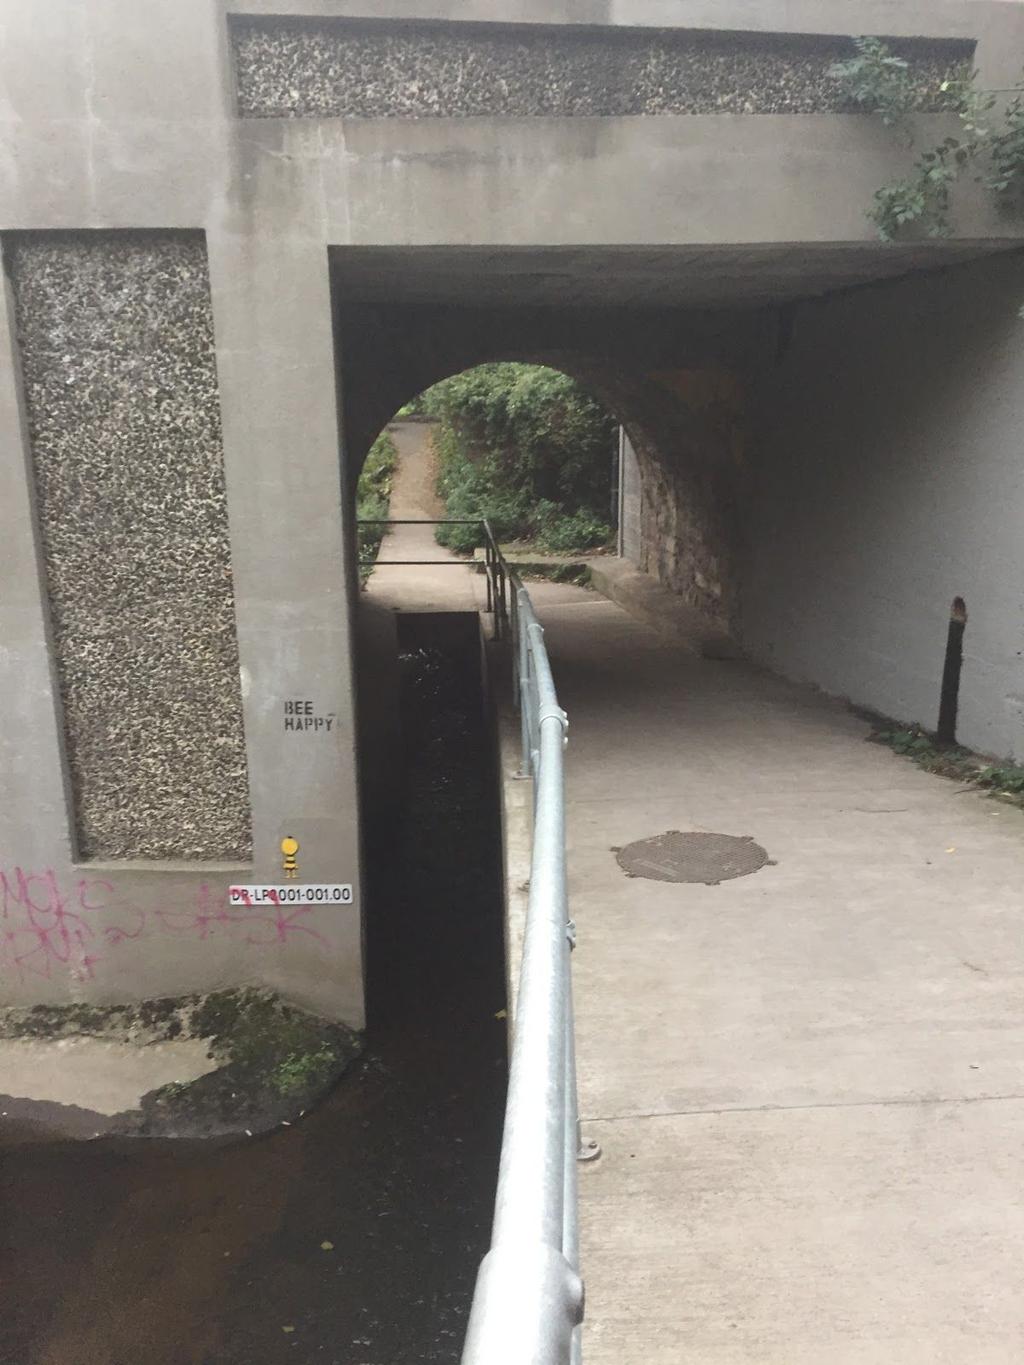 Using this underpass also requires cyclists to drop elevation only to gain that elevation again on the other side. We recommend that the designer investigate other options along here.